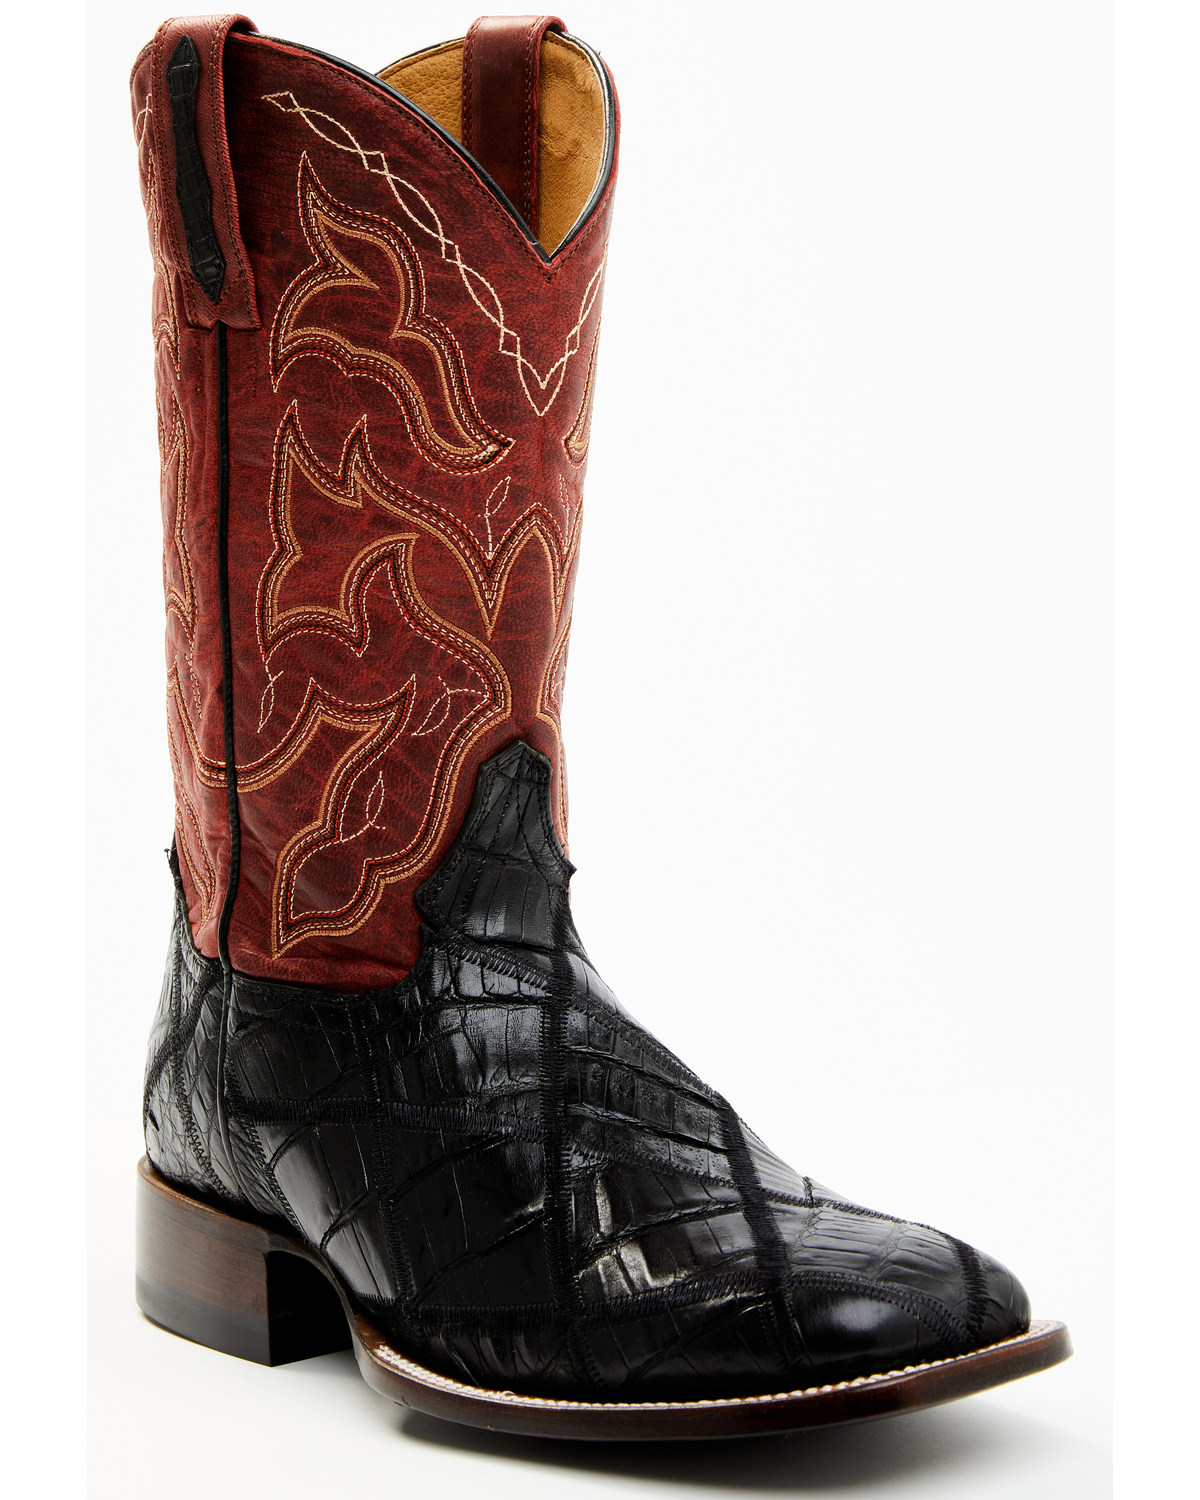 Cody James Men's Exotic Caiman Western Boots - Broad Square Toe